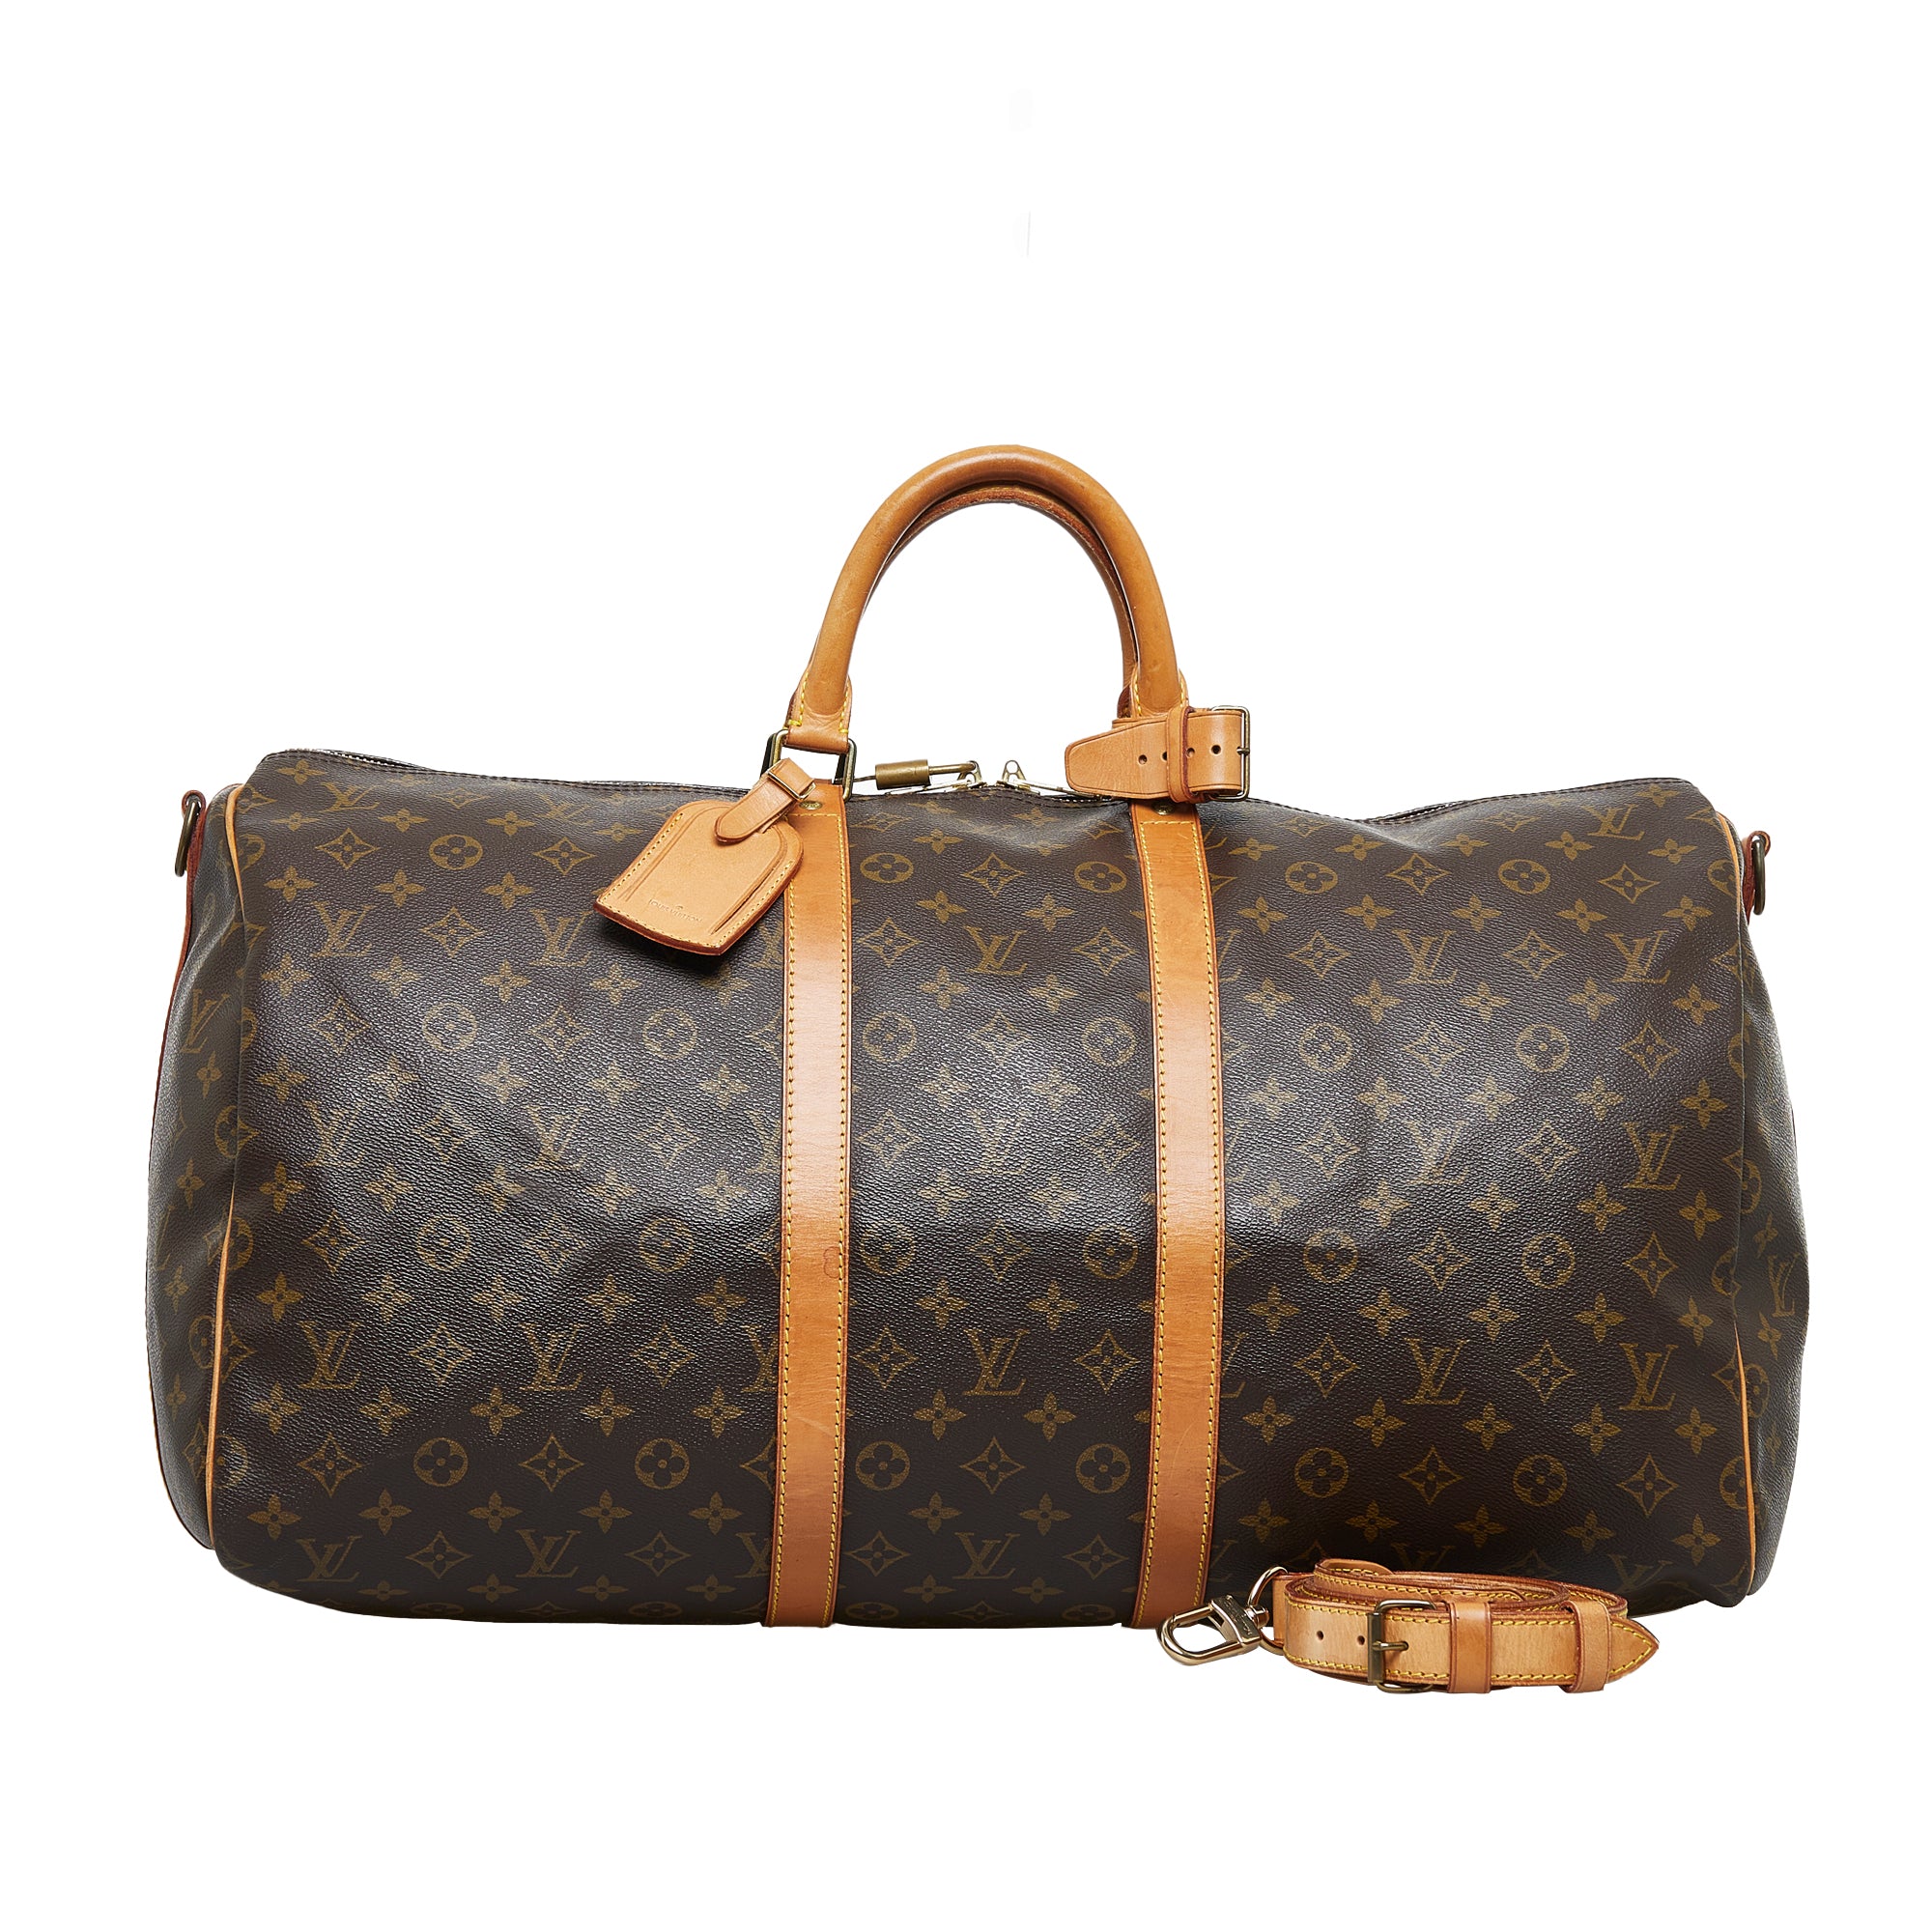 Products by Louis Vuitton: Keepall 45 with shoulder strap Mon Monogram